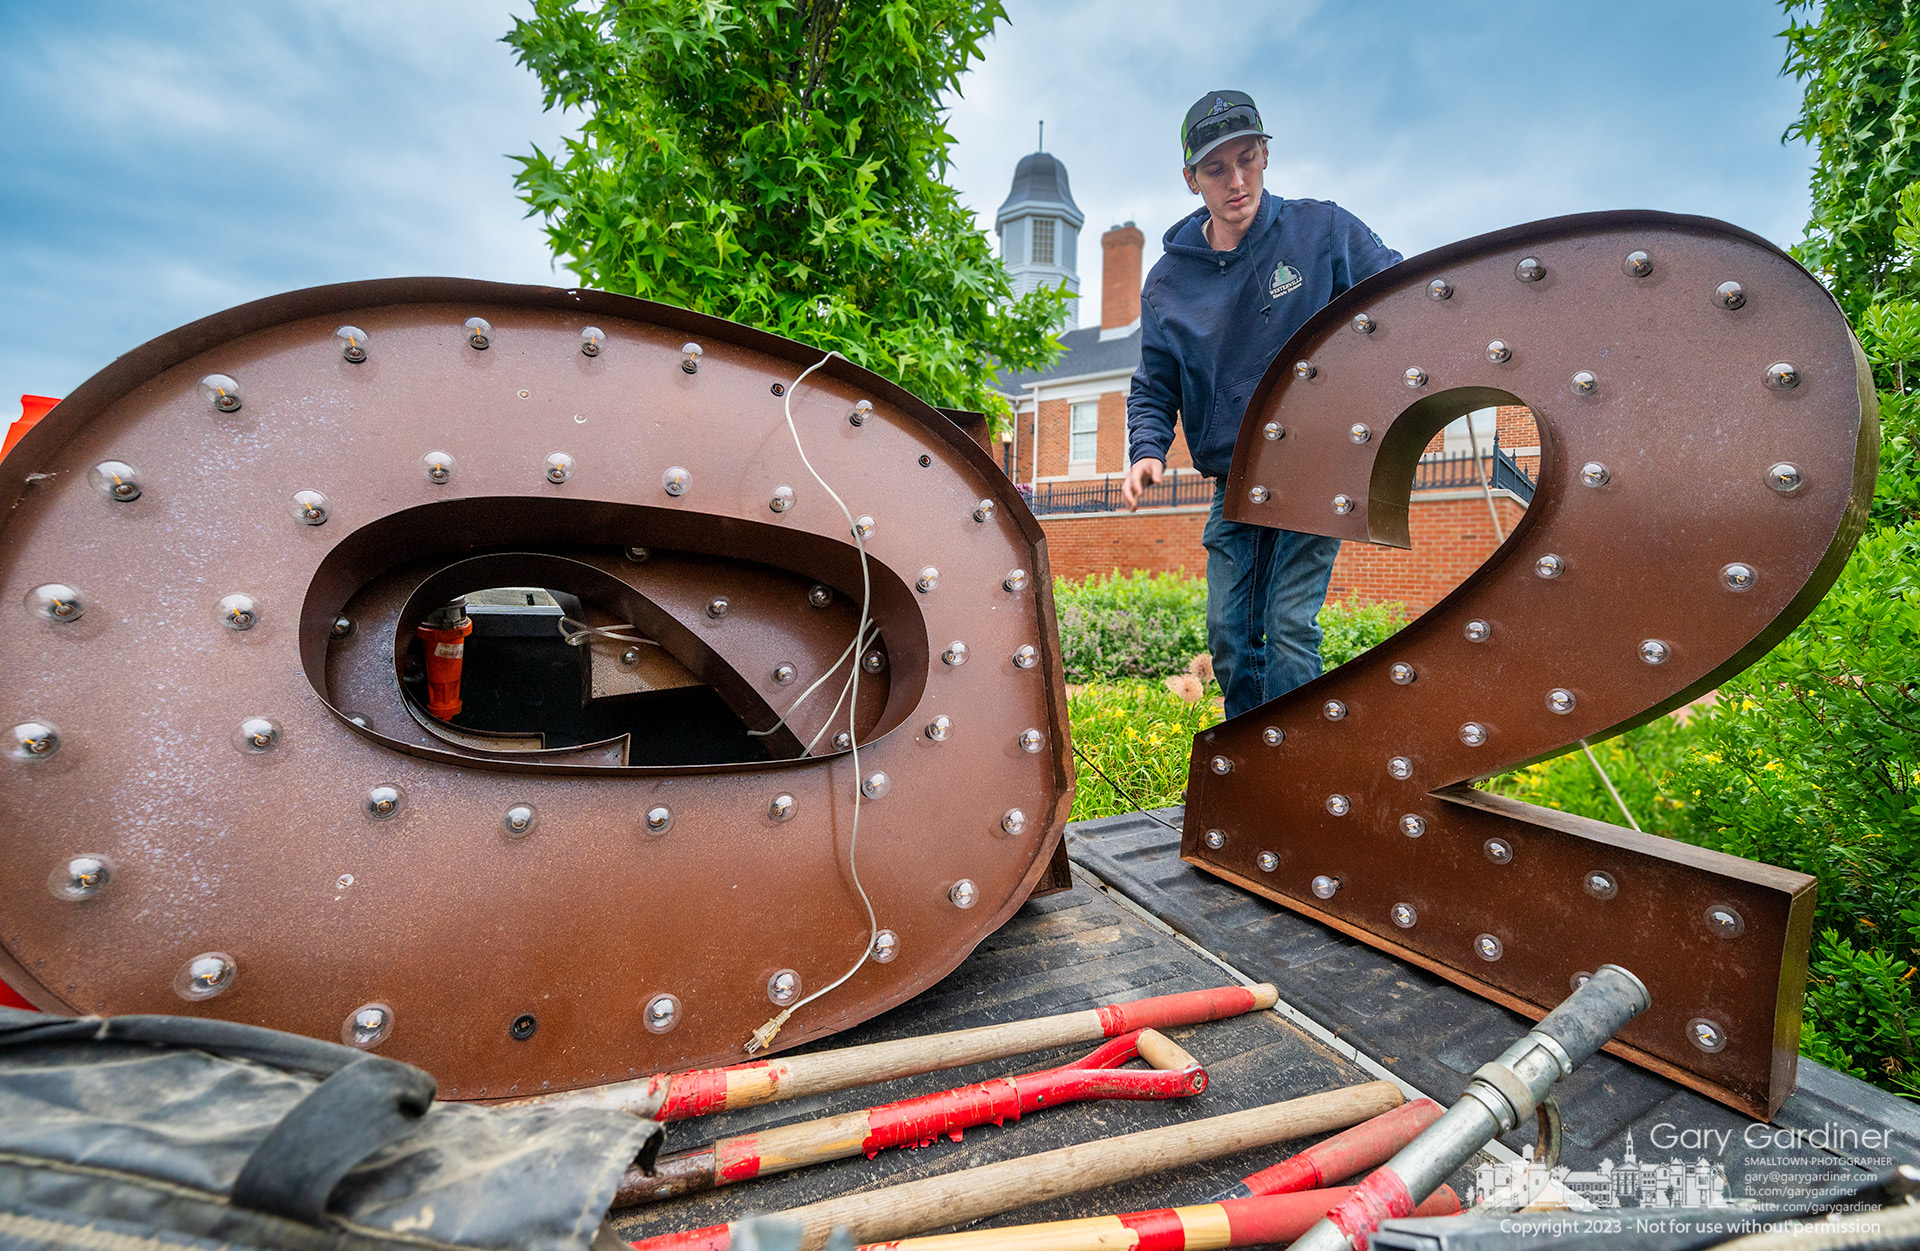 The lighted 2023 sign at City Hall, which marked the beginning of the new year and celebrated the graduation year of high school students in Westerville, is disassembled and removed after fulfilling its duty. My Final Photo for June 12, 2023.